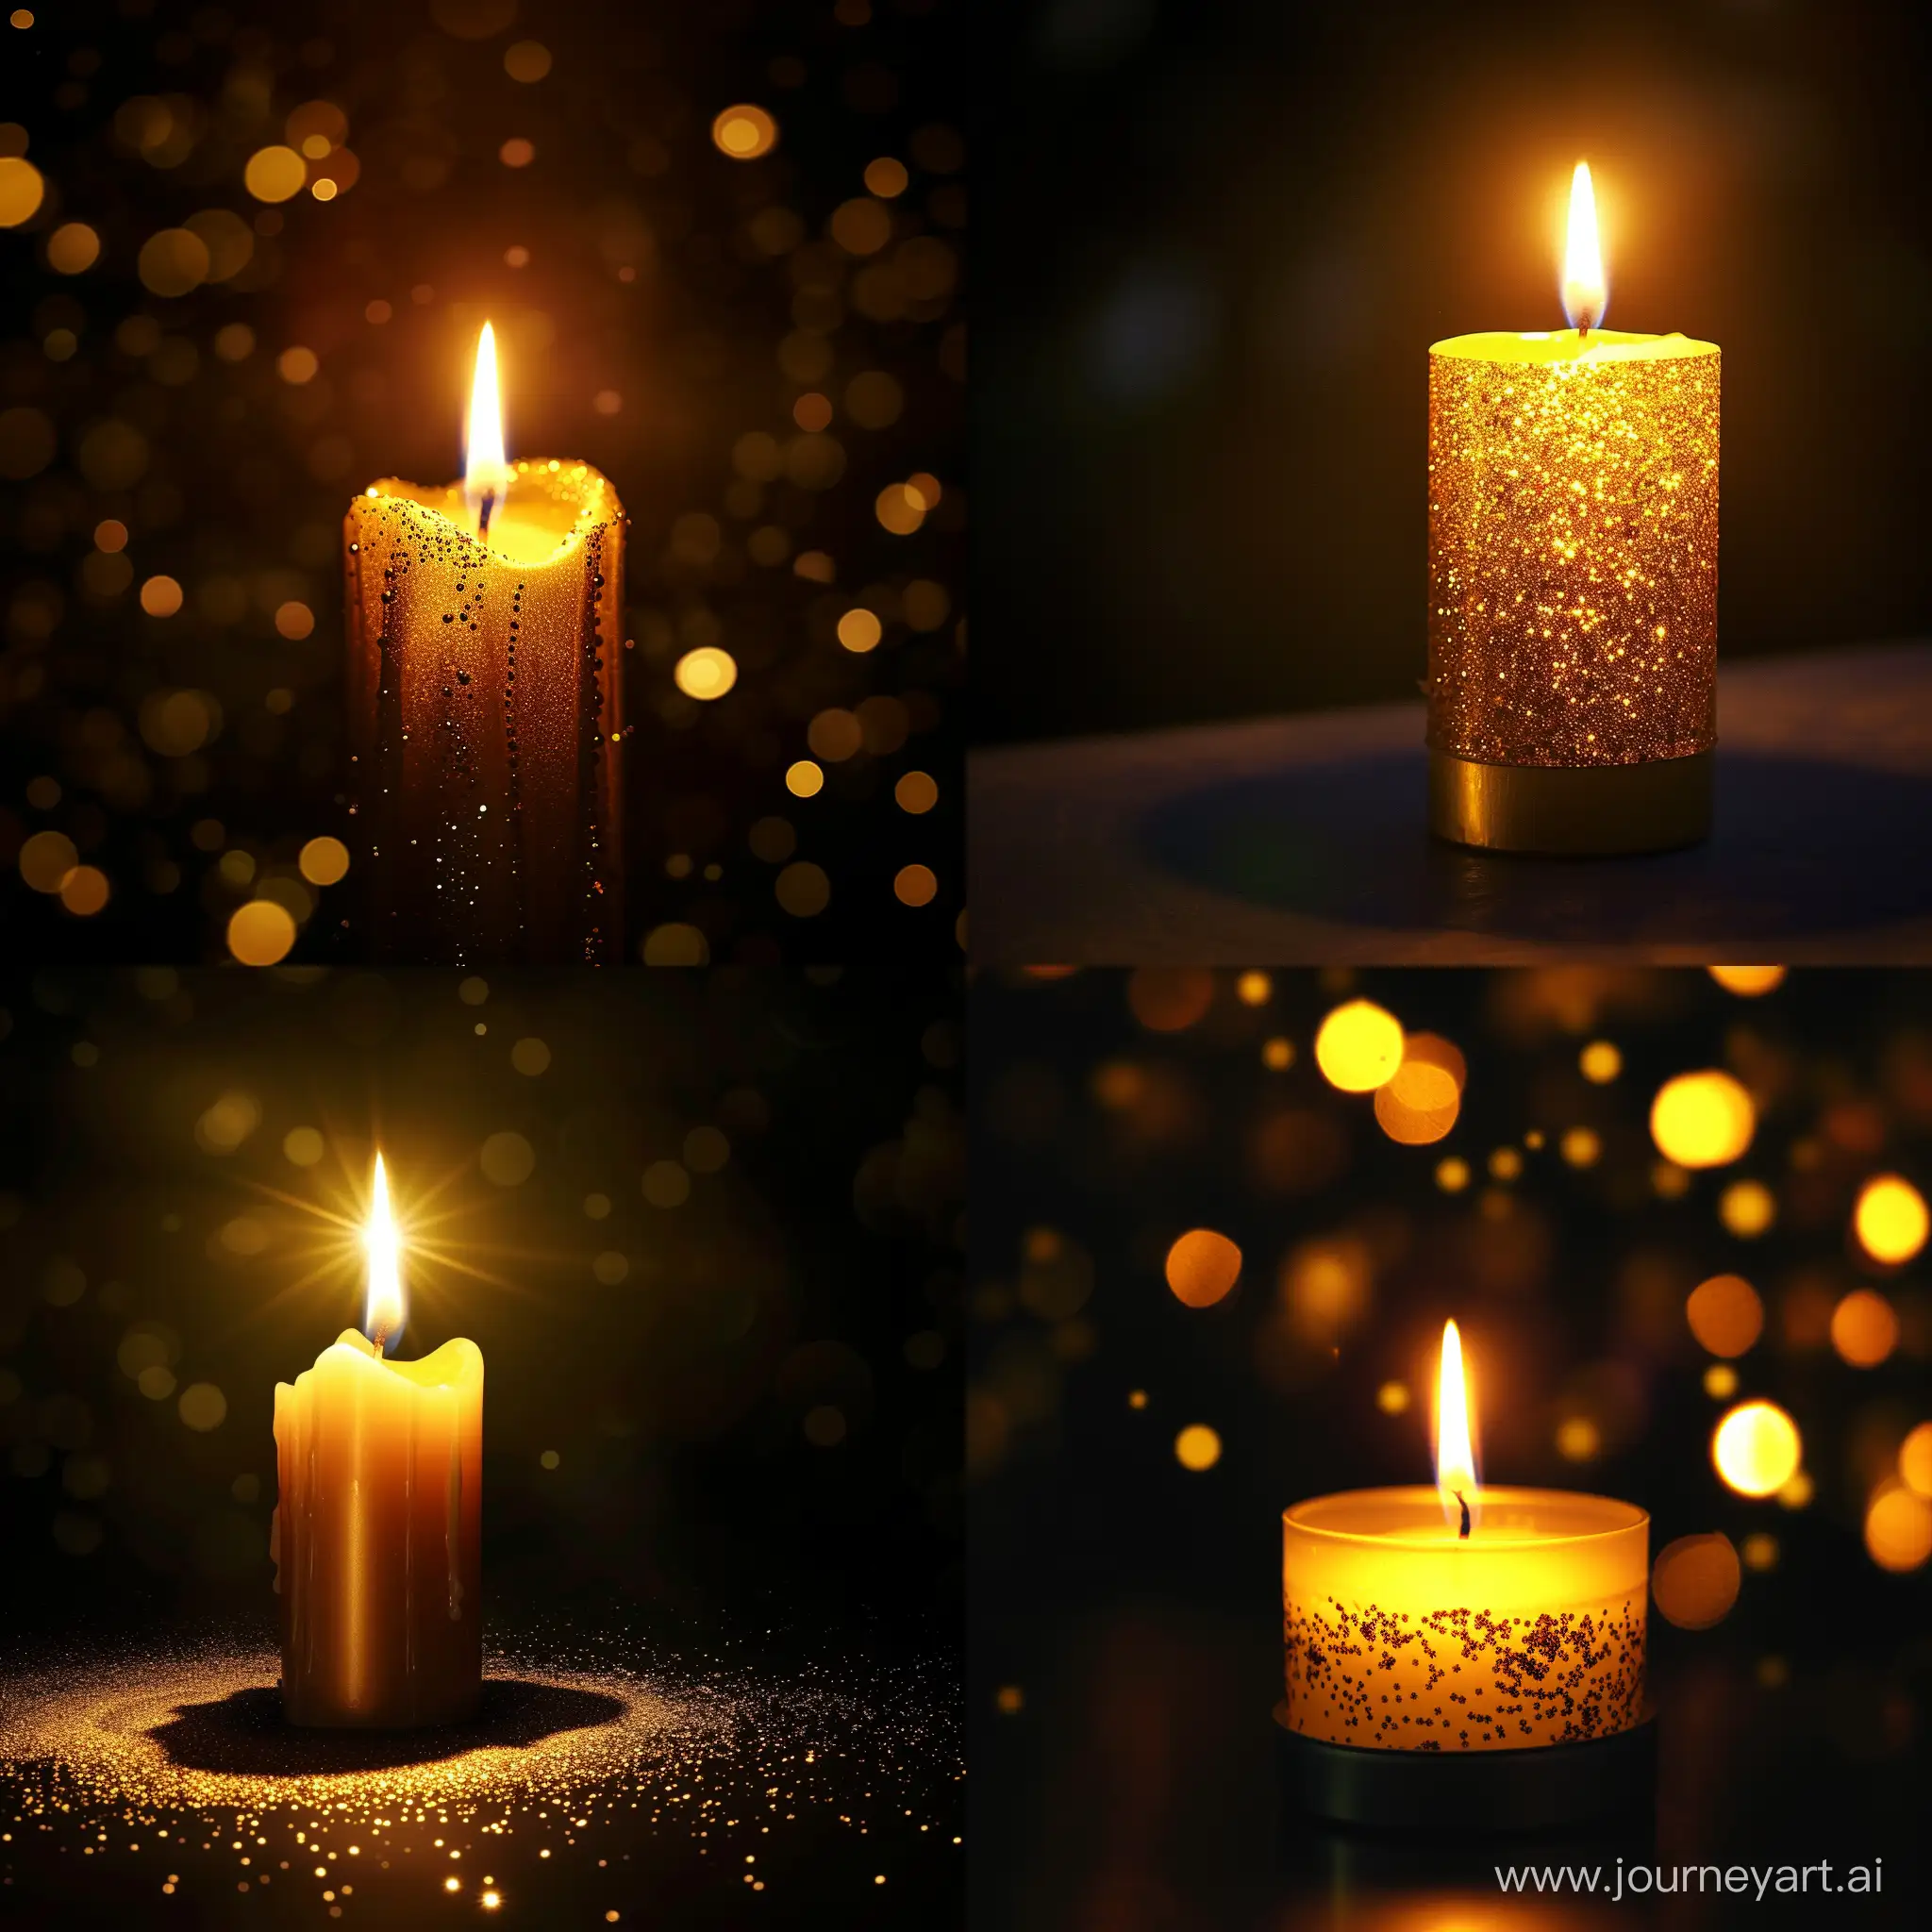 a candle shining golden light in the darkness, lighting the way to hope and joy